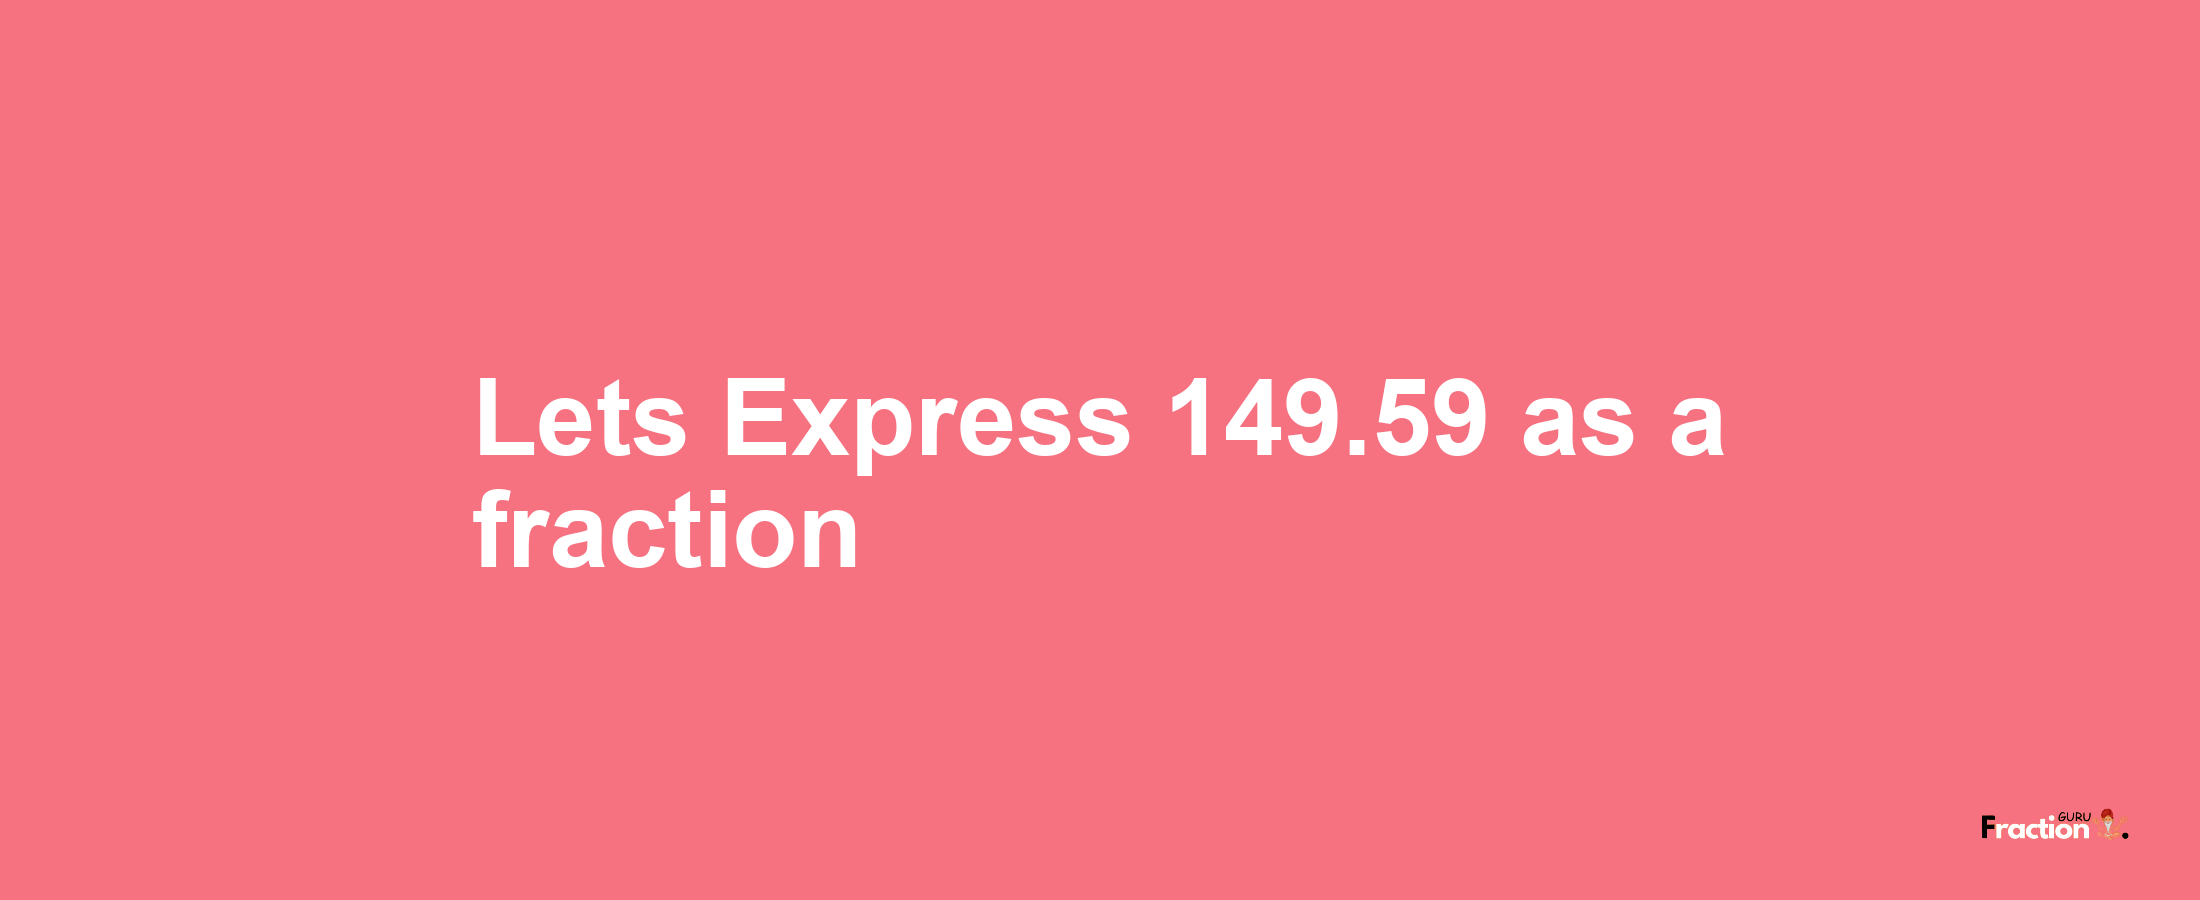 Lets Express 149.59 as afraction